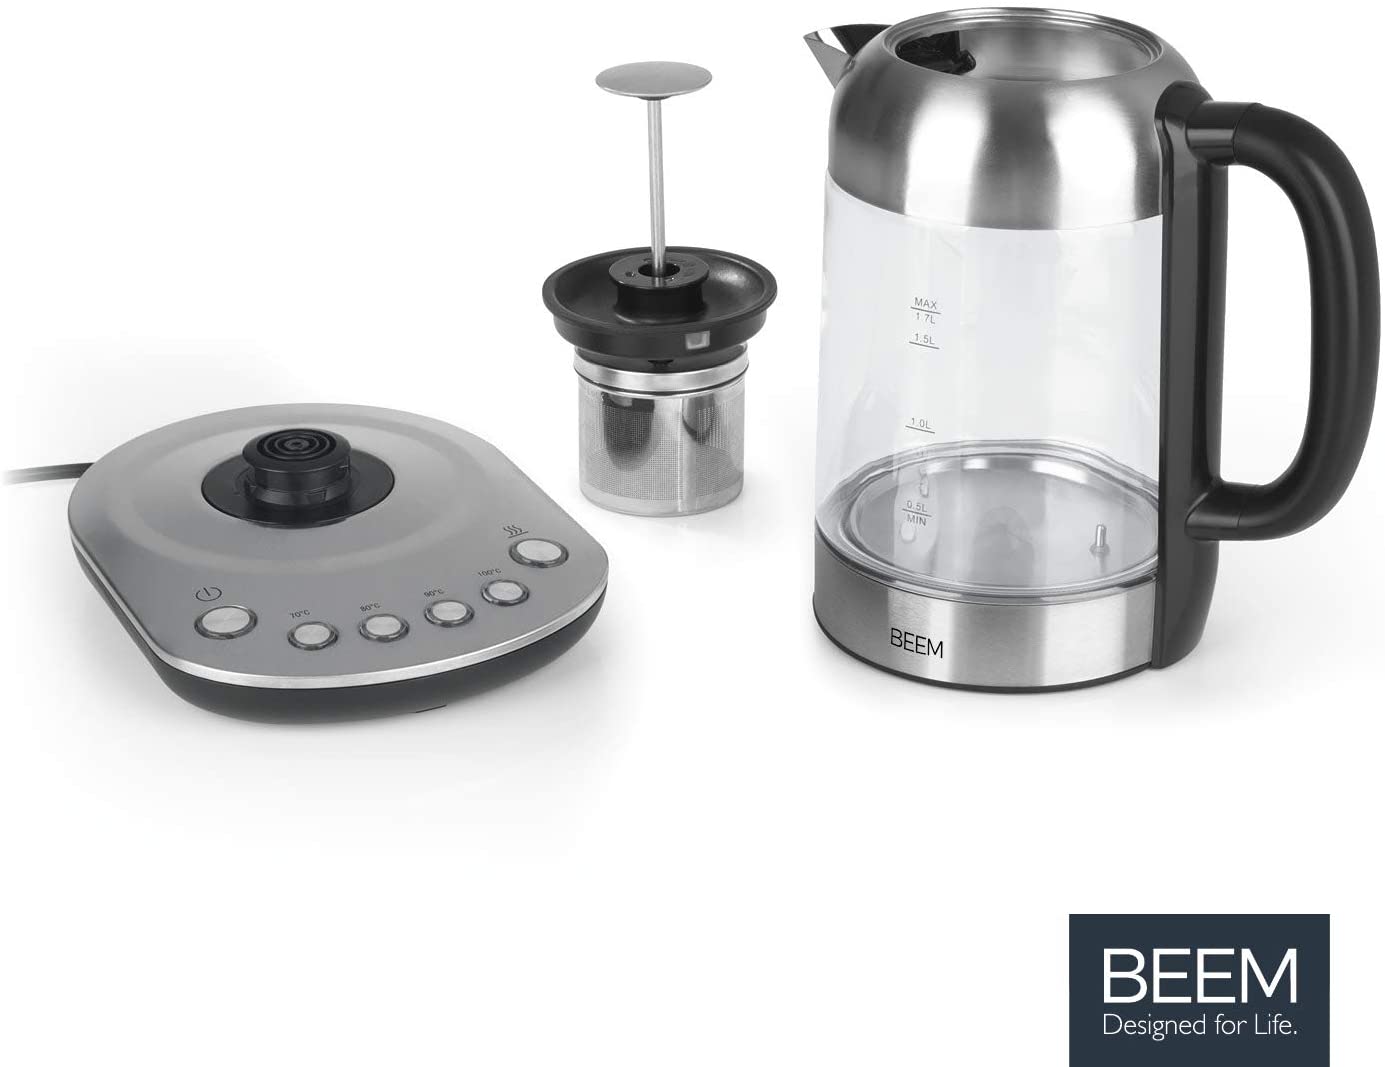 http://honestforwarder.com/uploads/product/beem-tea-1110sr-elements-of-coffee-tea-2000-w-1-7-l-electric-kettle-with-tea-strainer-individual-temperature-control-with-warming-function-stainless-steel-bpa-free78.jpg